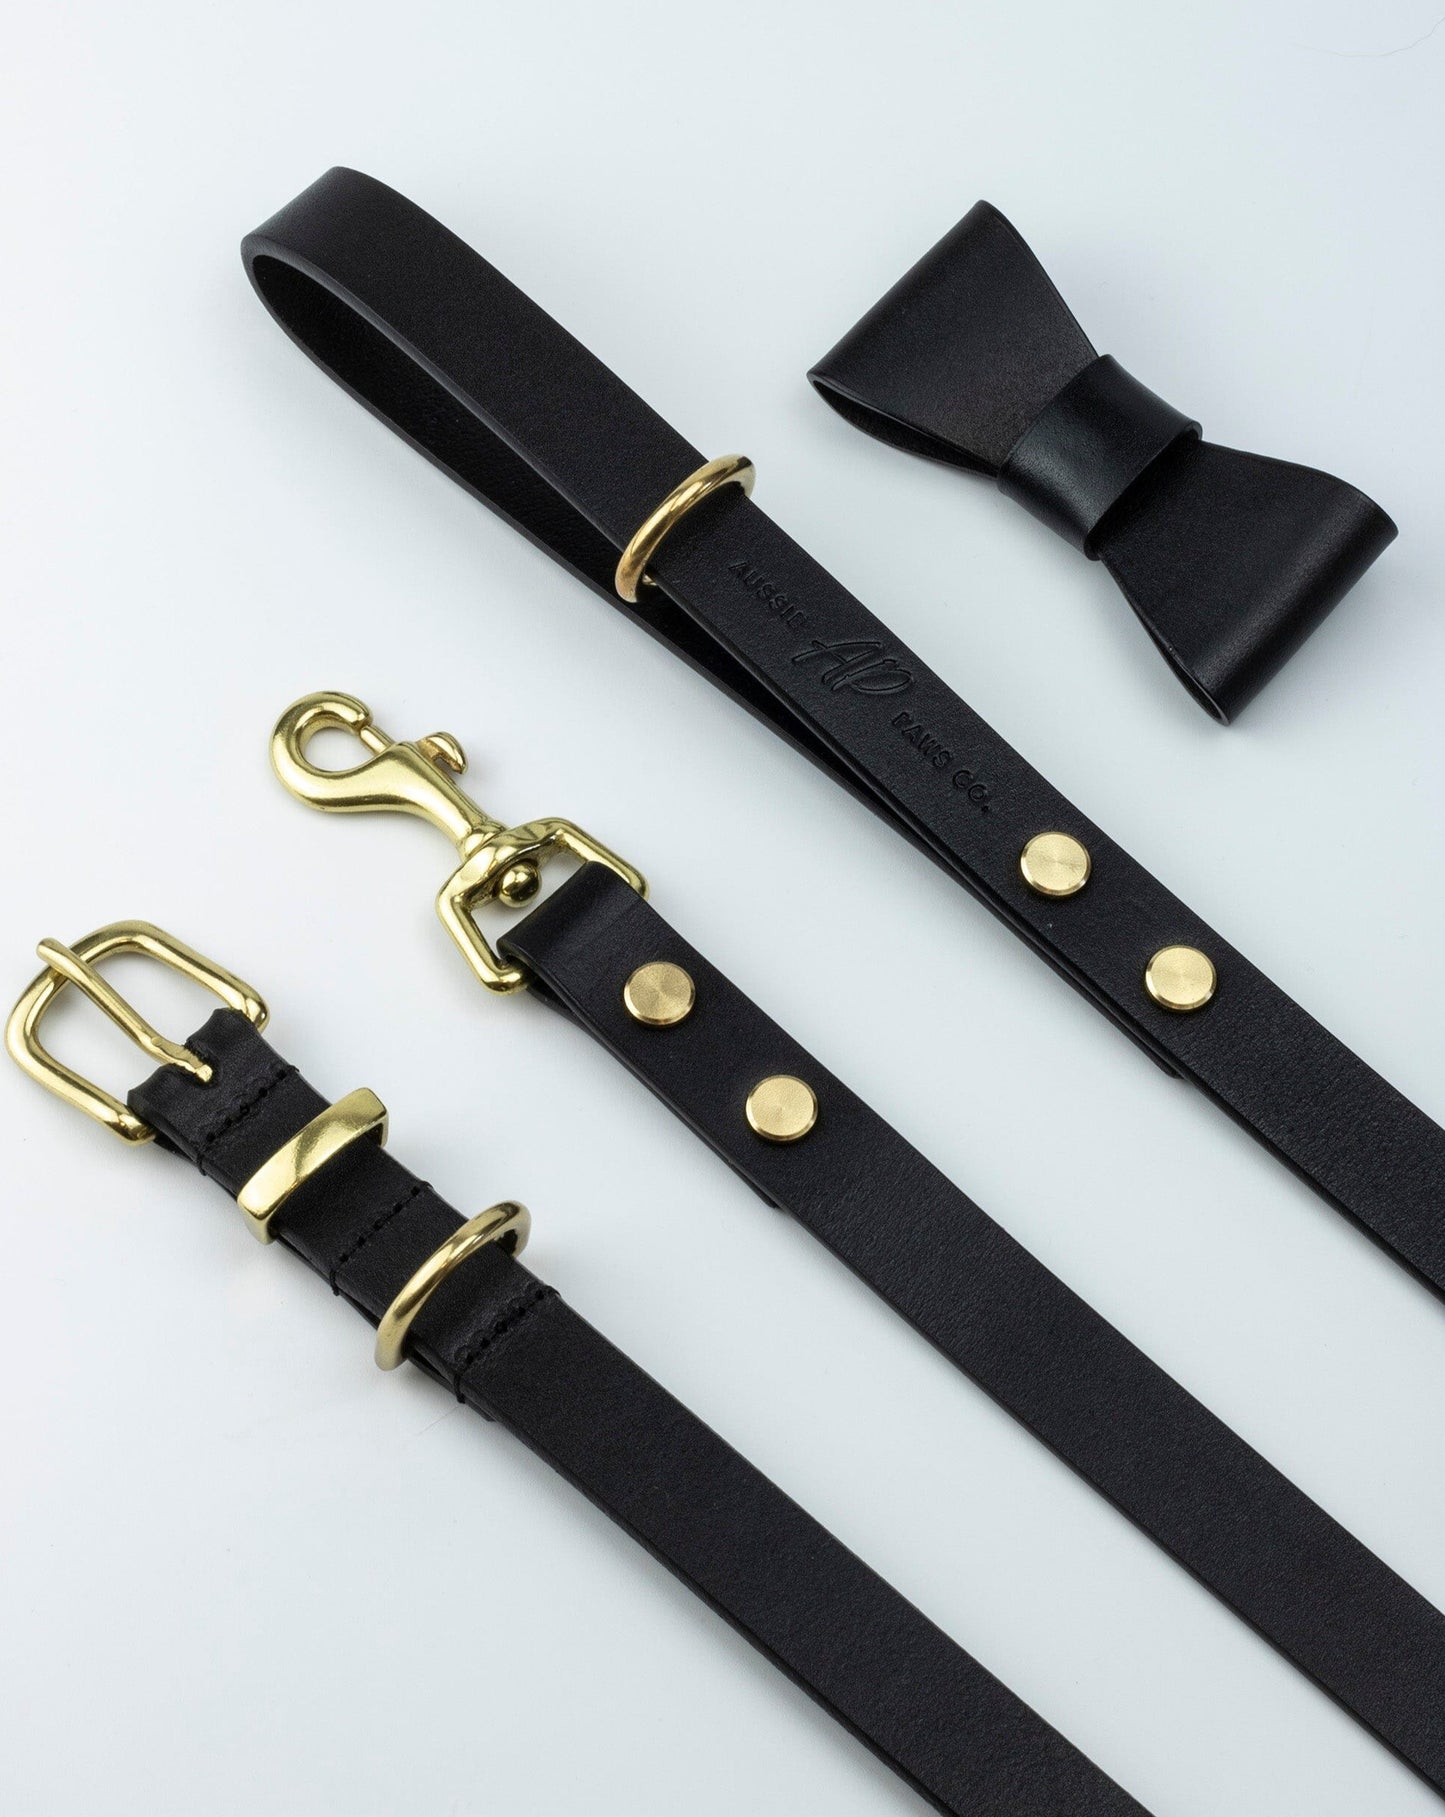 Black leather dog lead and collar set